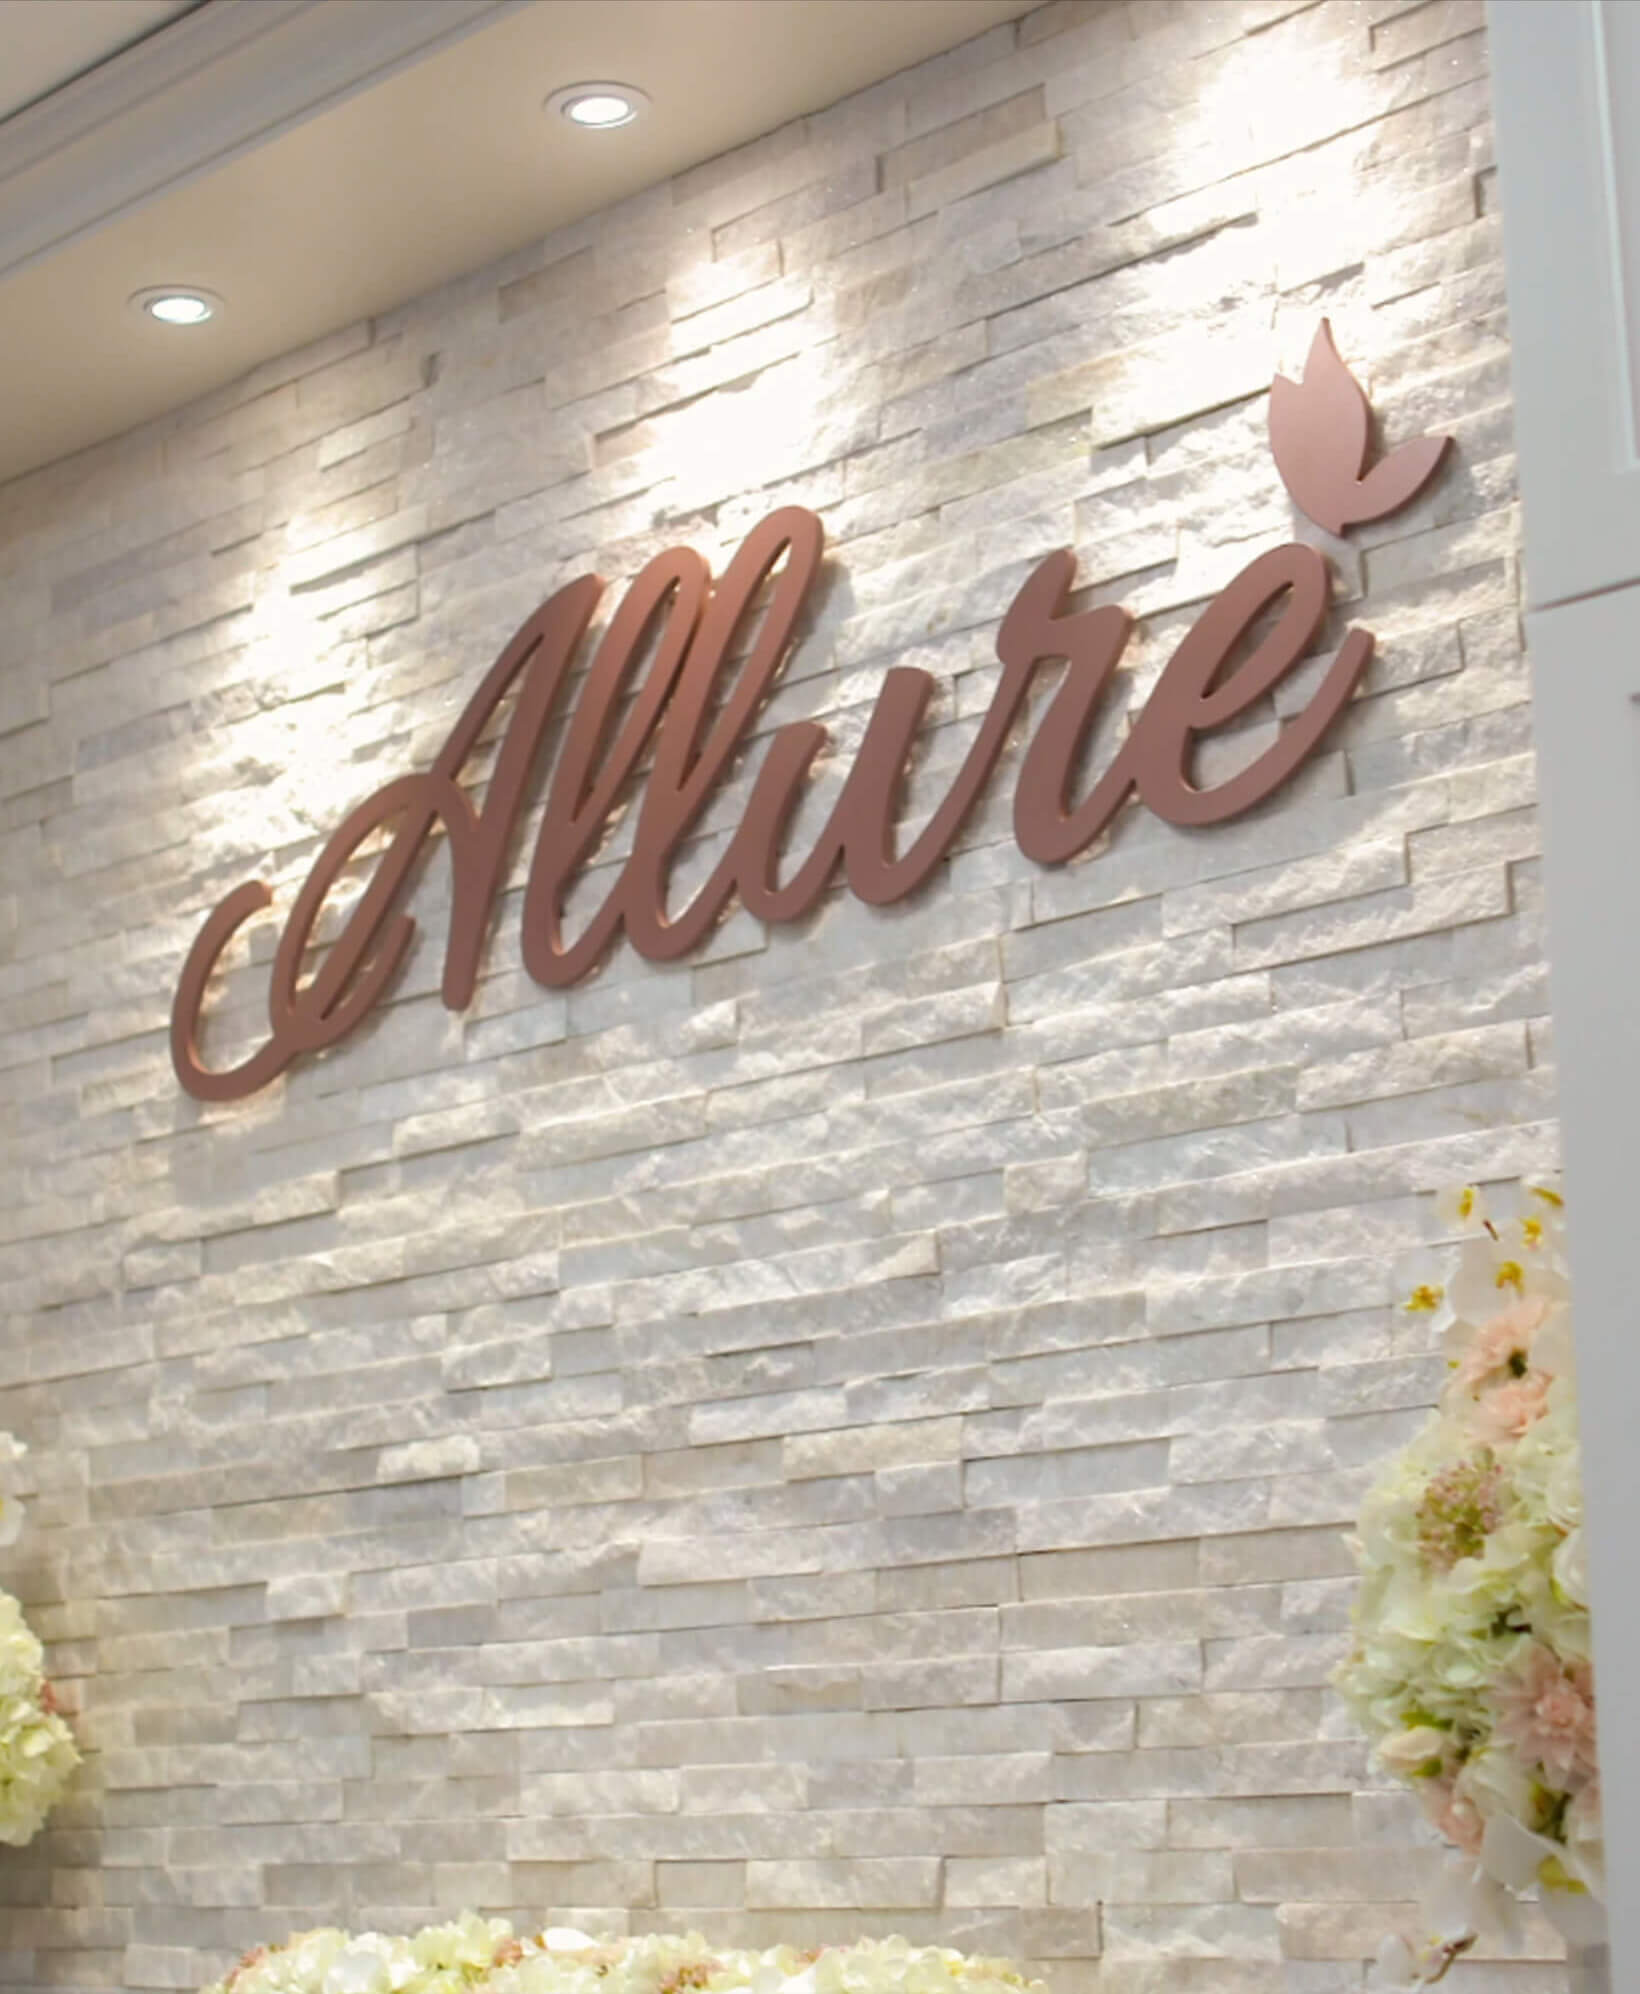 Allure sign on white rock building.